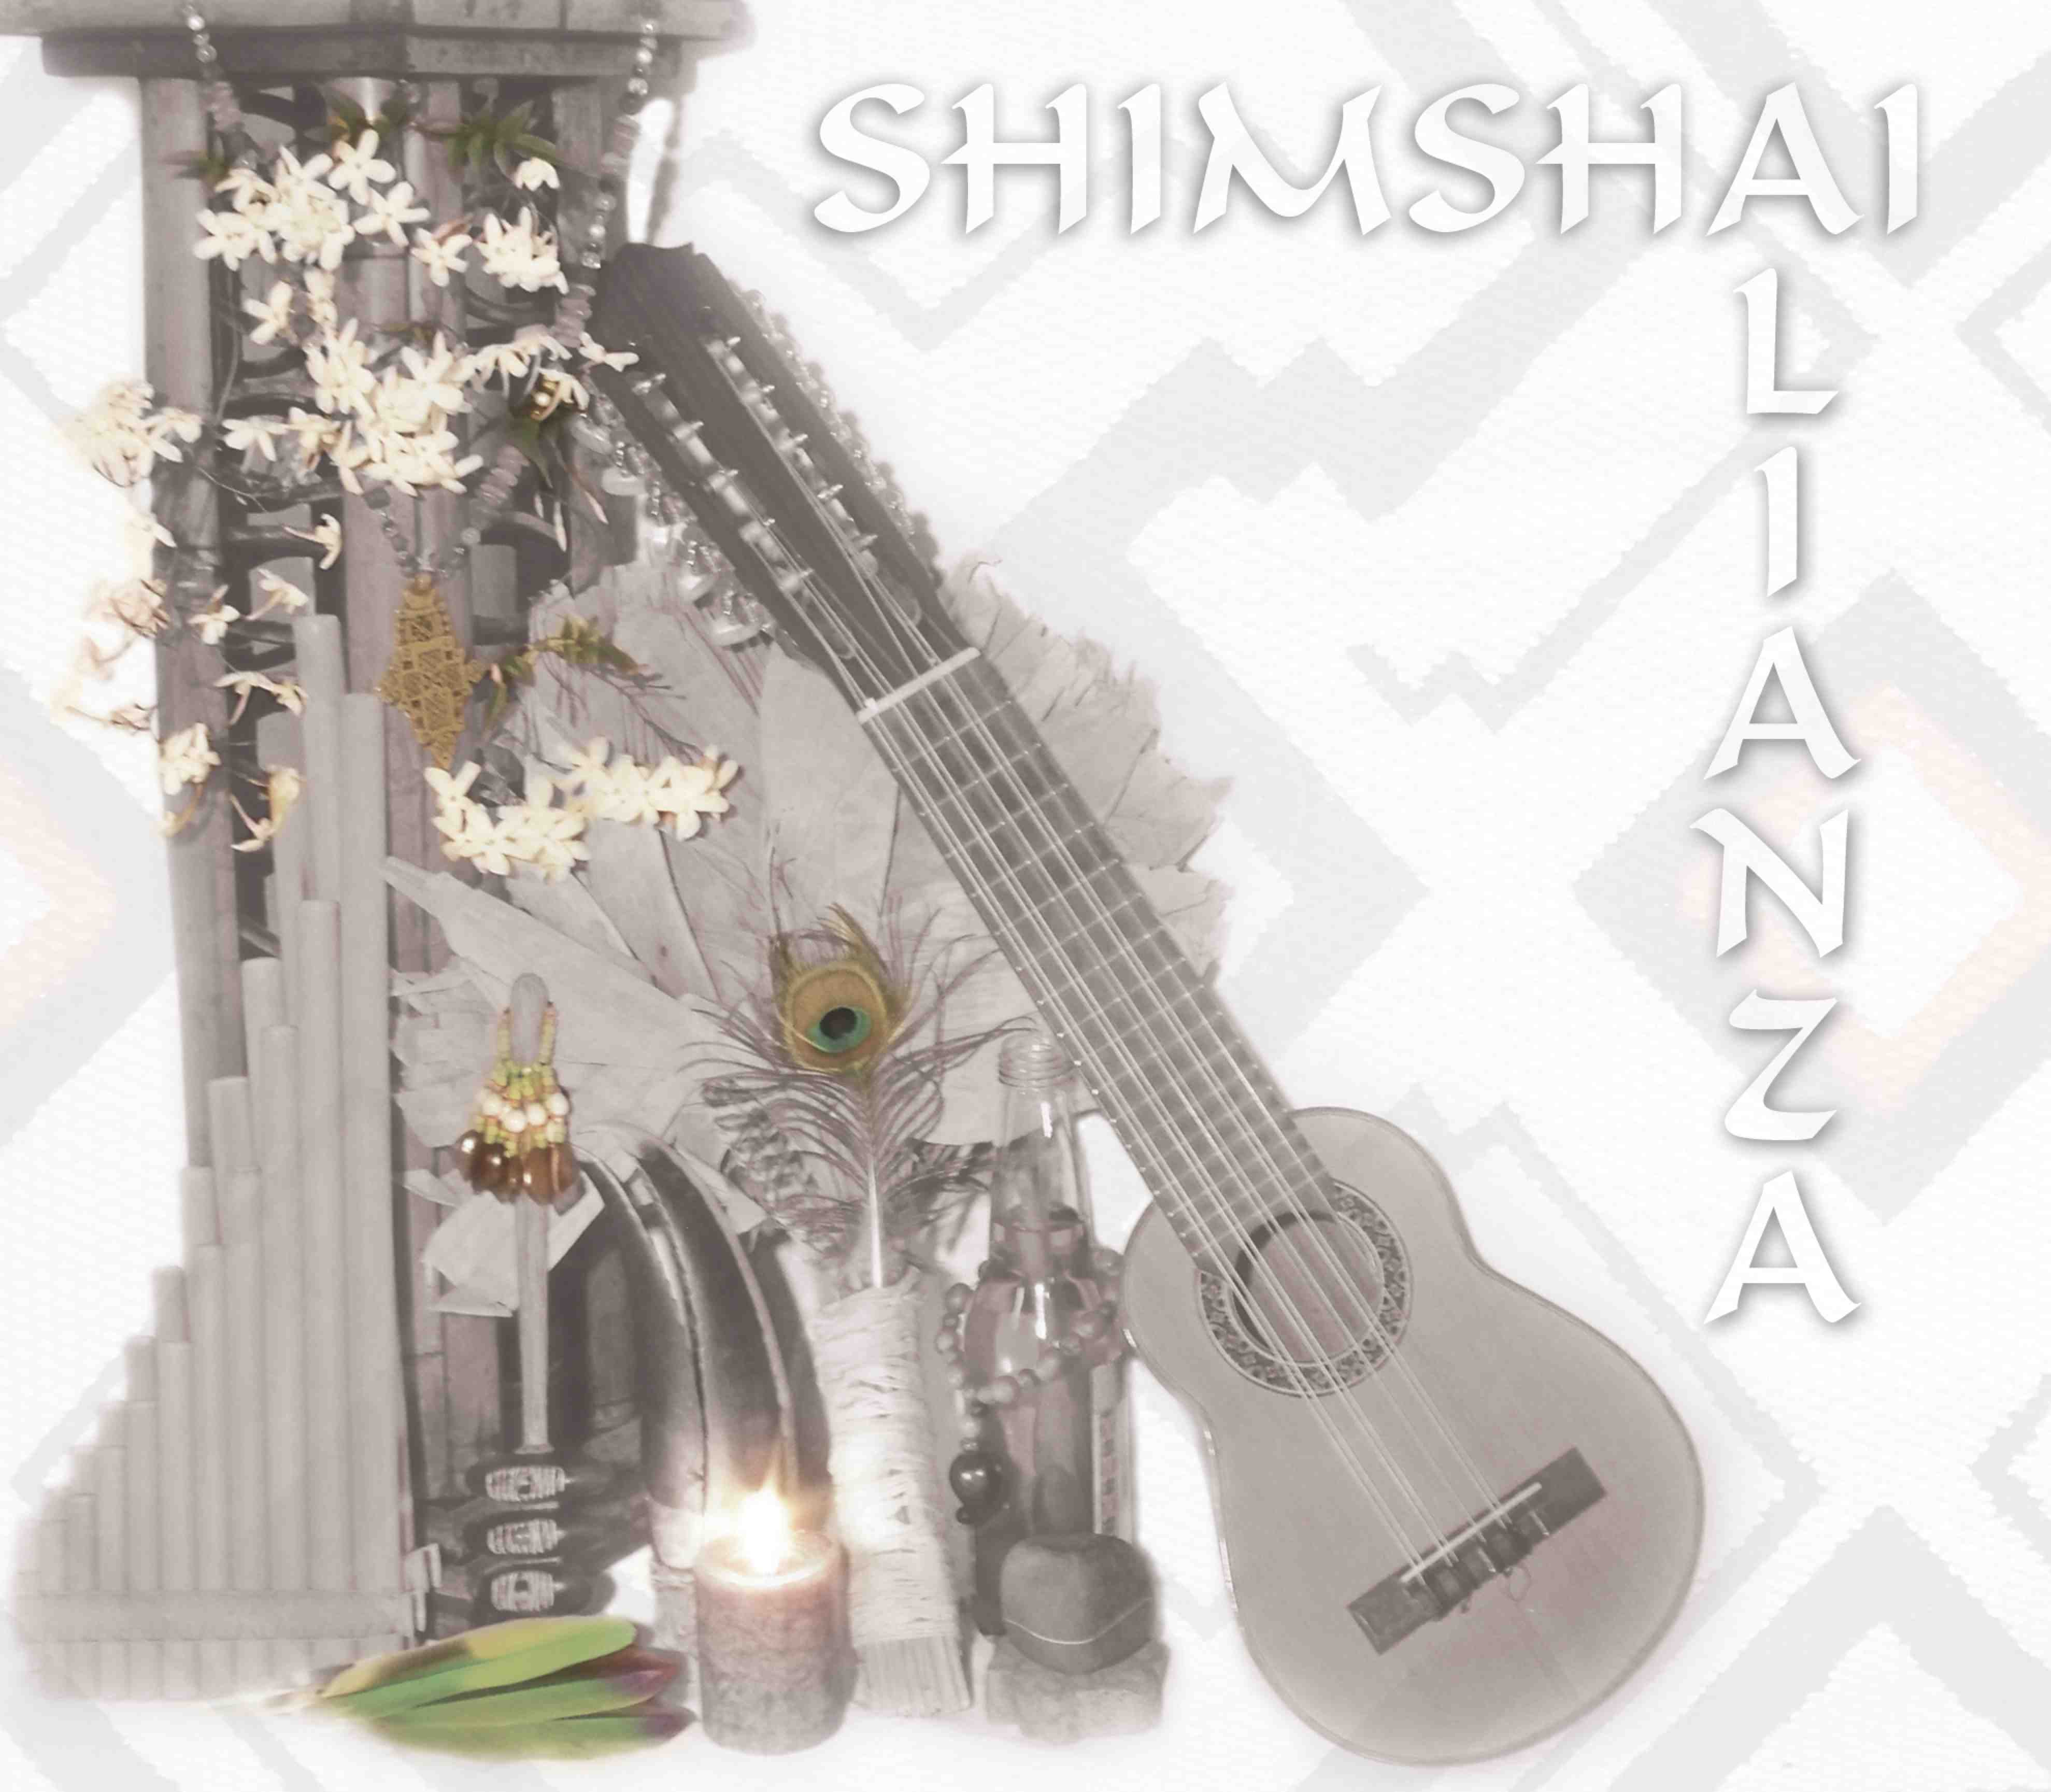 La Semilla (Be in the Now) by Sonny George from the album Alianza by Shimshai, spiritual world folk fusion